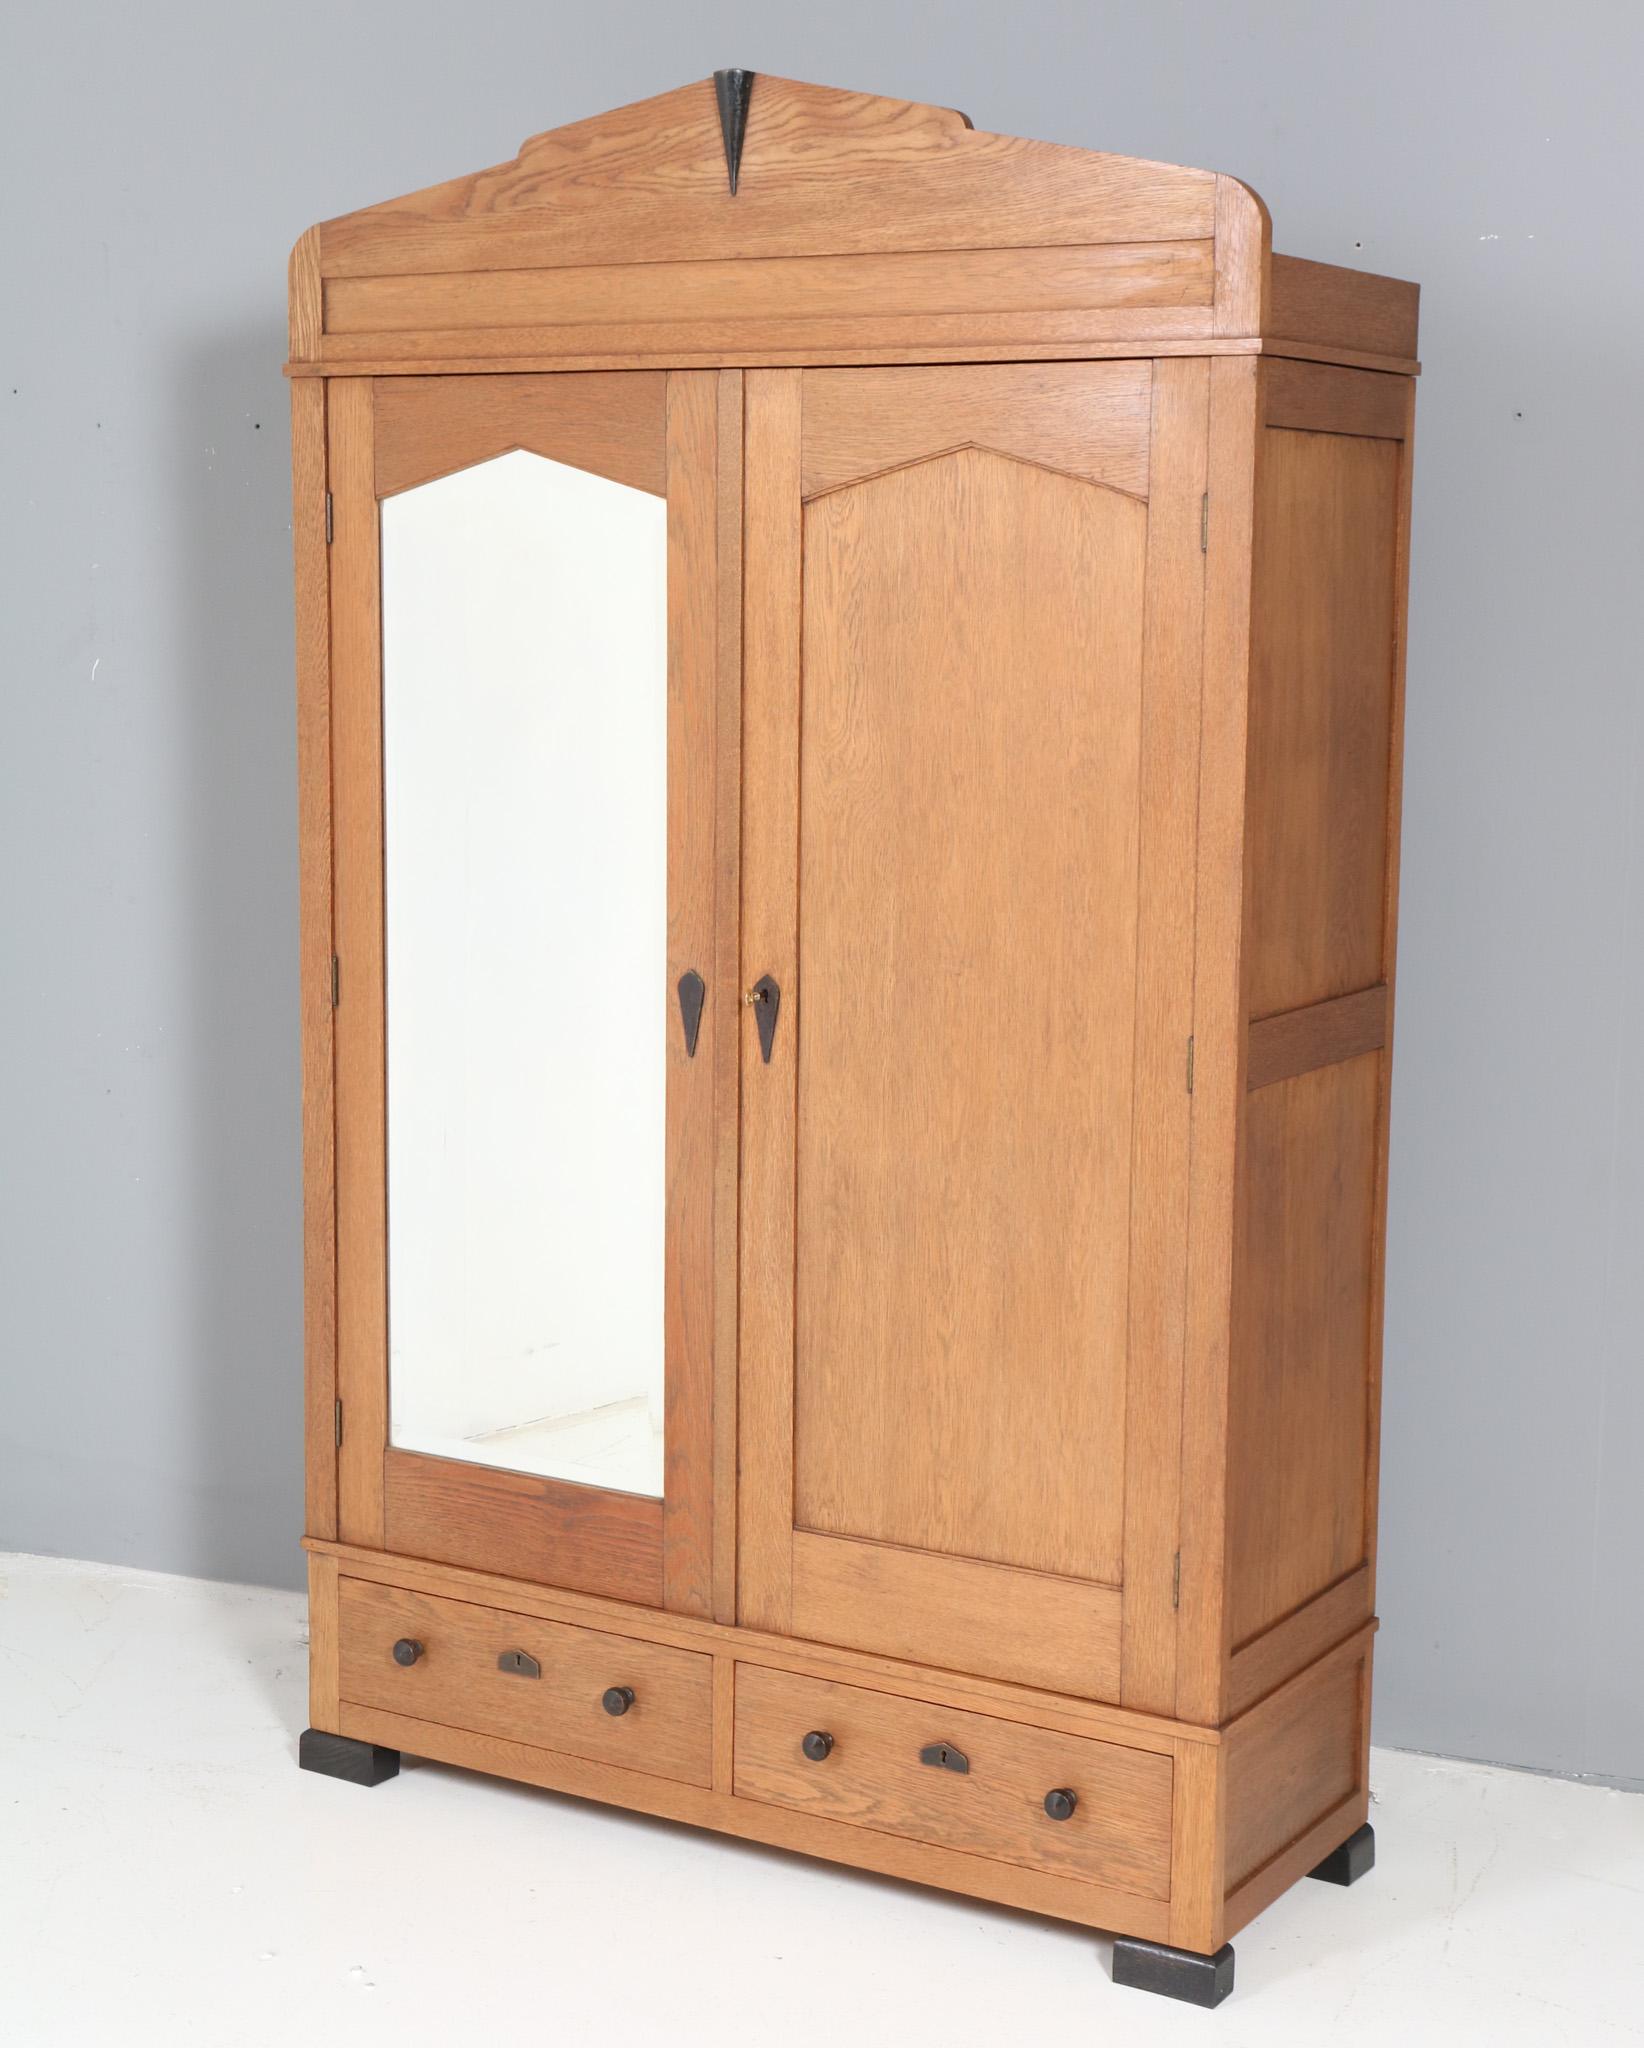 Stunning and rare Art Deco Amsterdamse School armoire or wardrobe.
Design by Fa. Drilling Amsterdam.
Striking Dutch design from the 1920s.
Solid oak with original black lacquered key entries and knobs on doors and drawer.
Original beveled mirror and